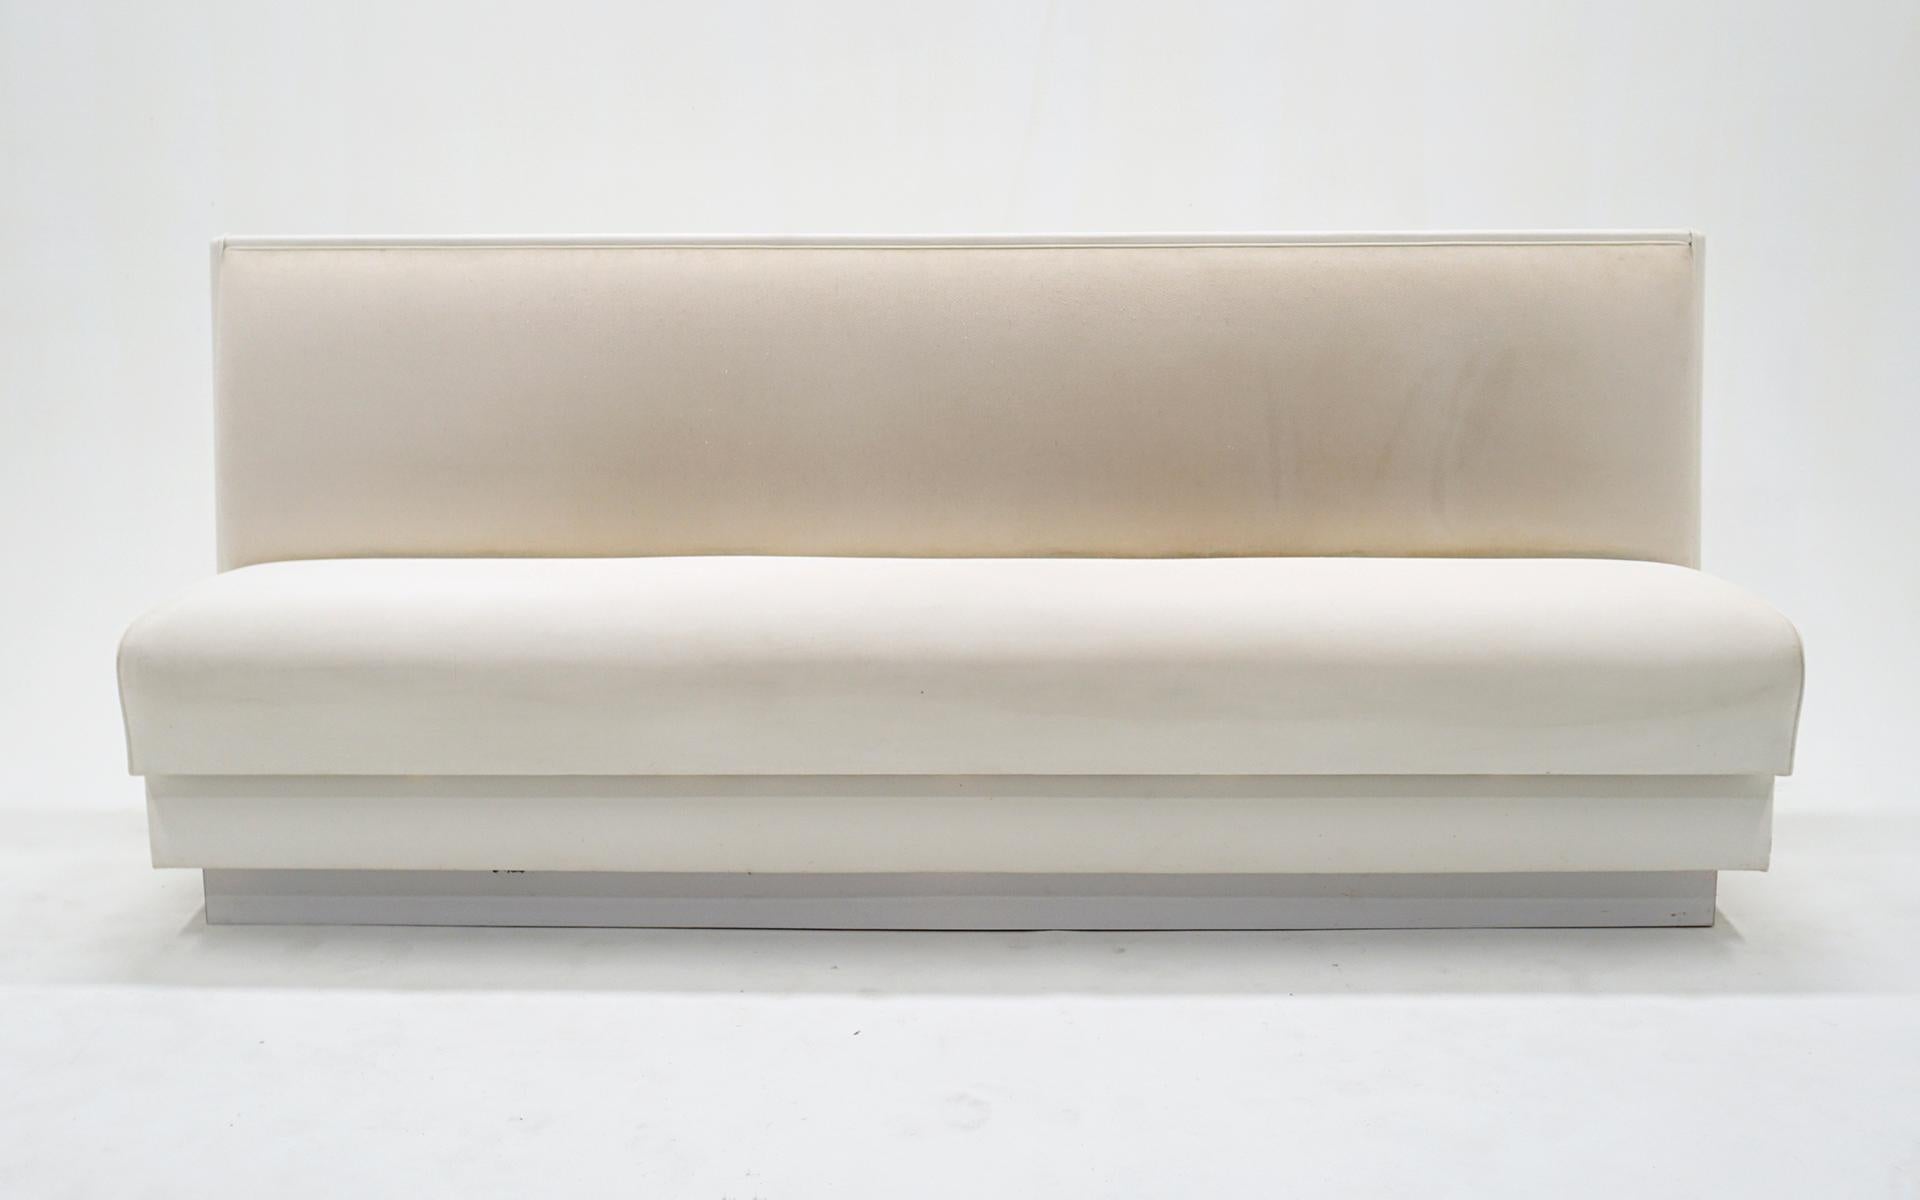 Custom made, super high quality banquette / bench / sofa.  Off white upholstery seat and seat back with leather-like vinyl sides and finished back.  This was custom made for a space and used very little.  No stains, holes or tears.  Minor pilling,